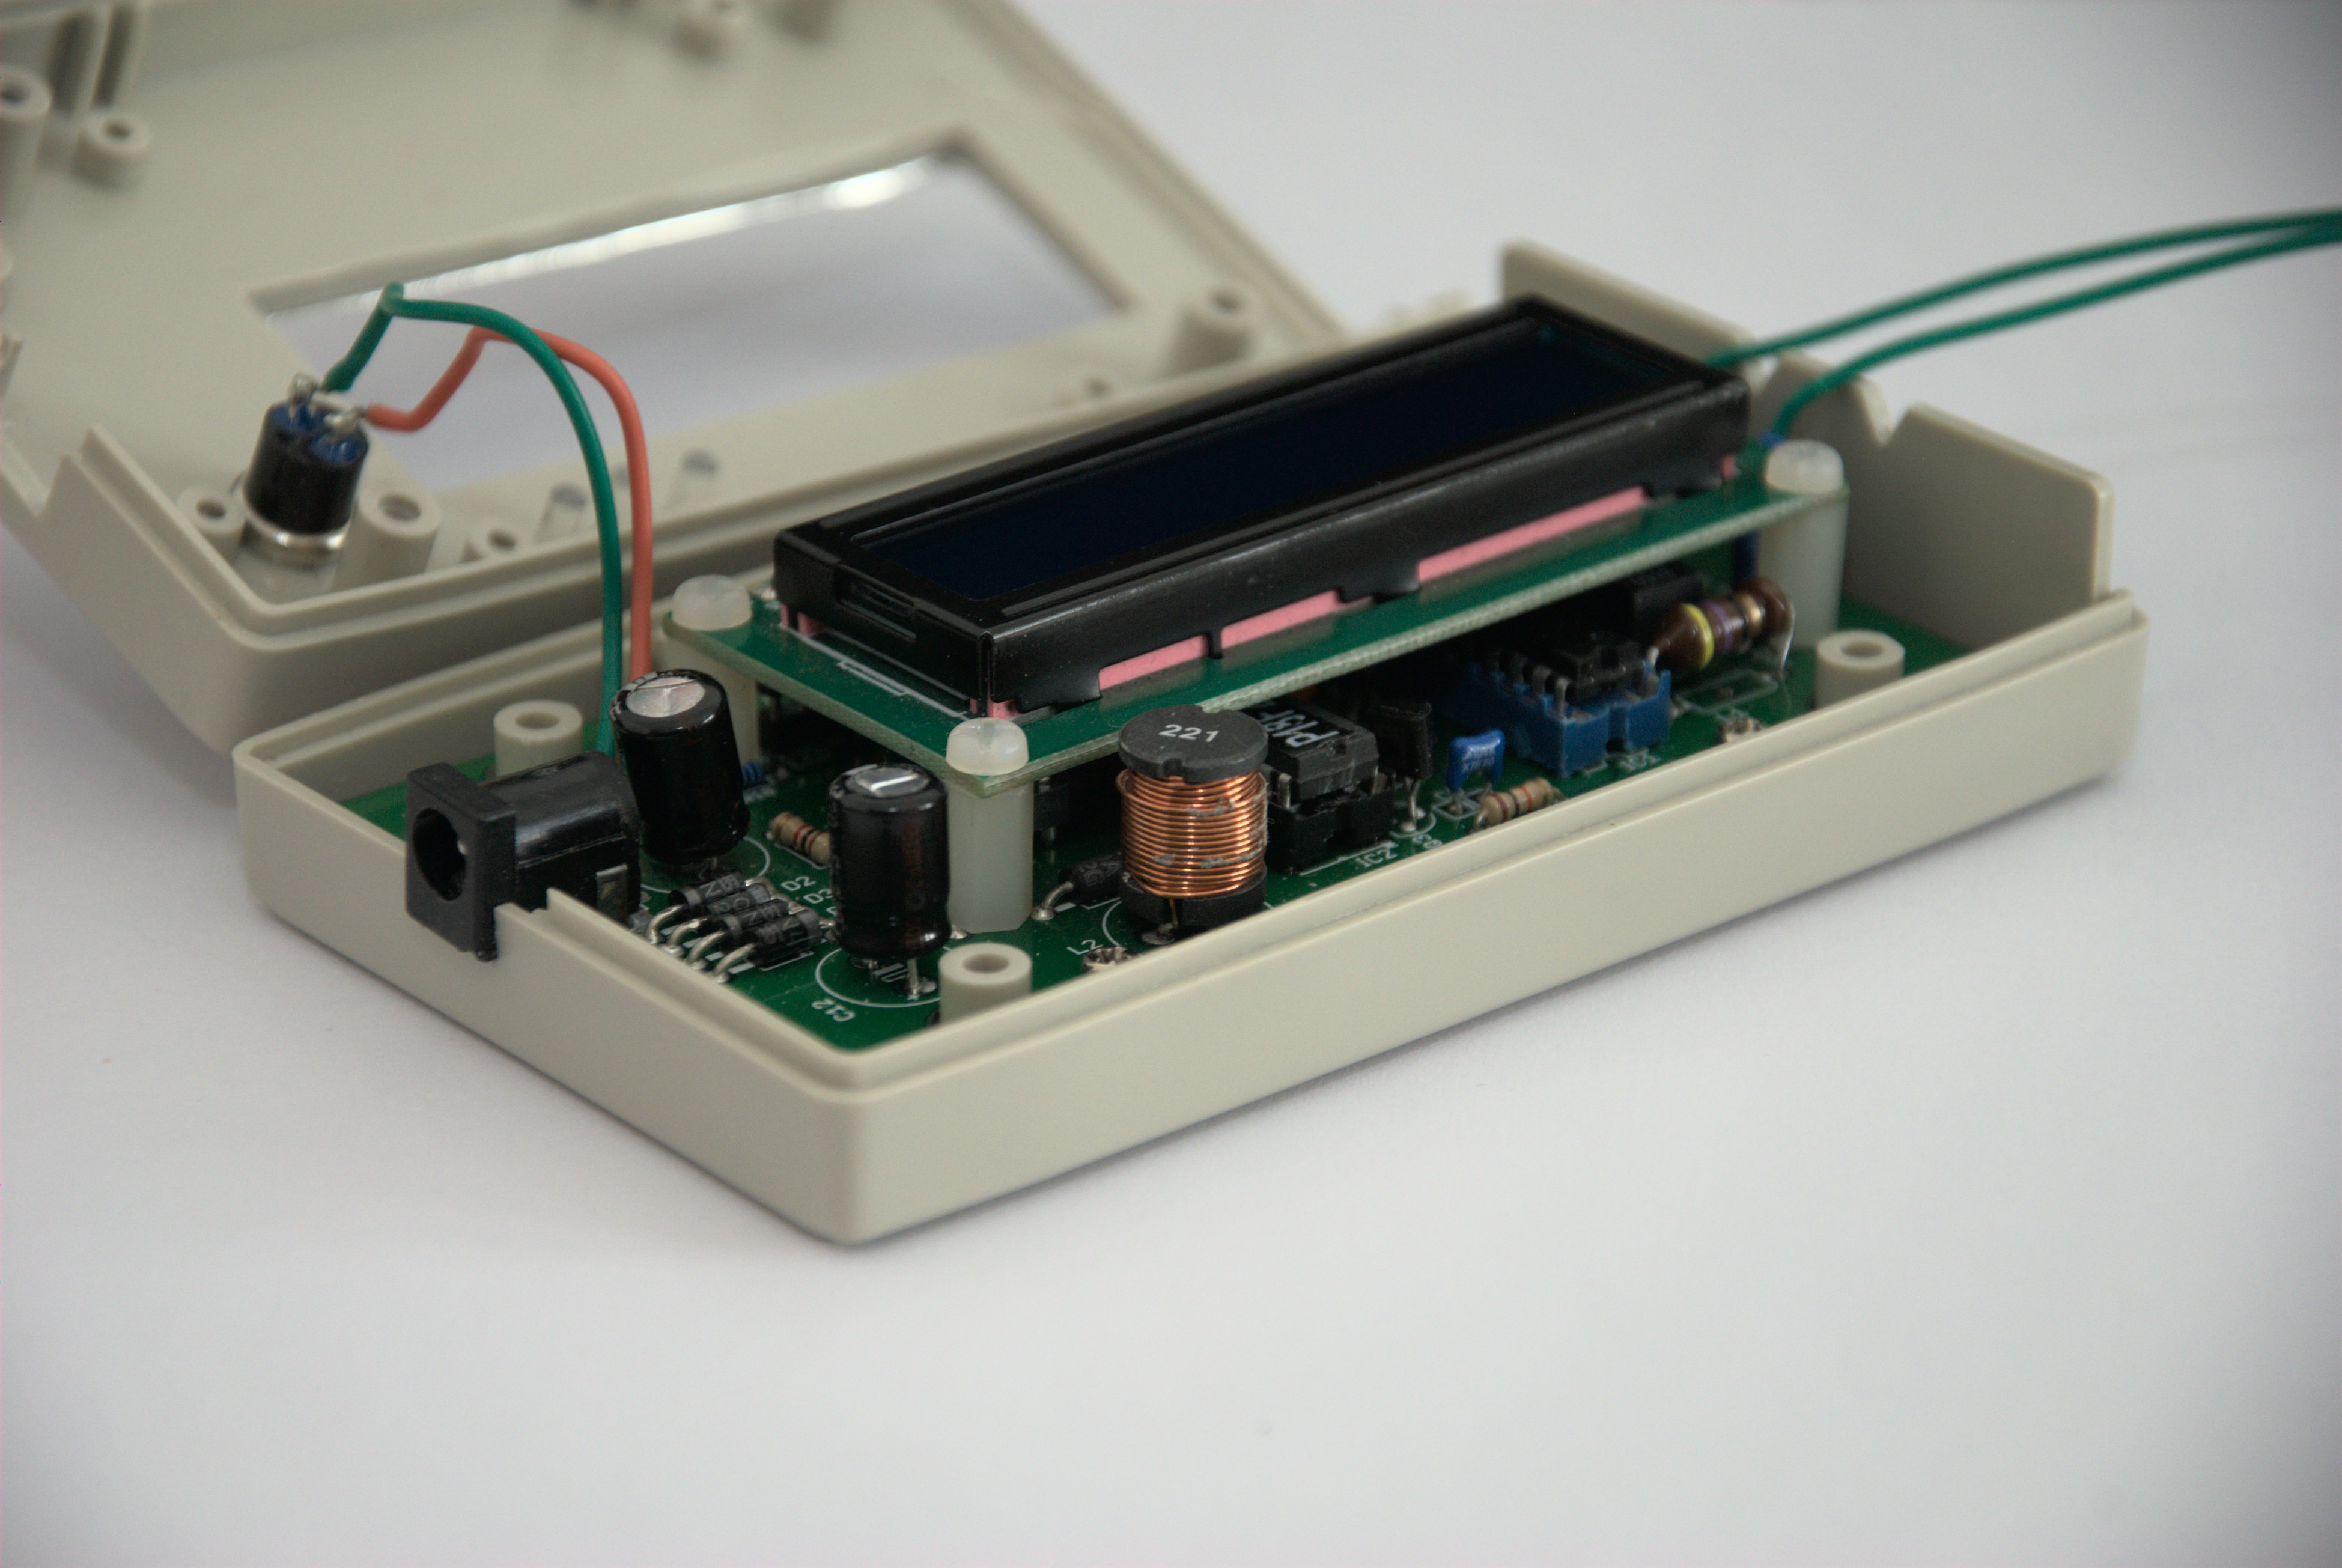 The circuit board for the inductance meter in the enclosure